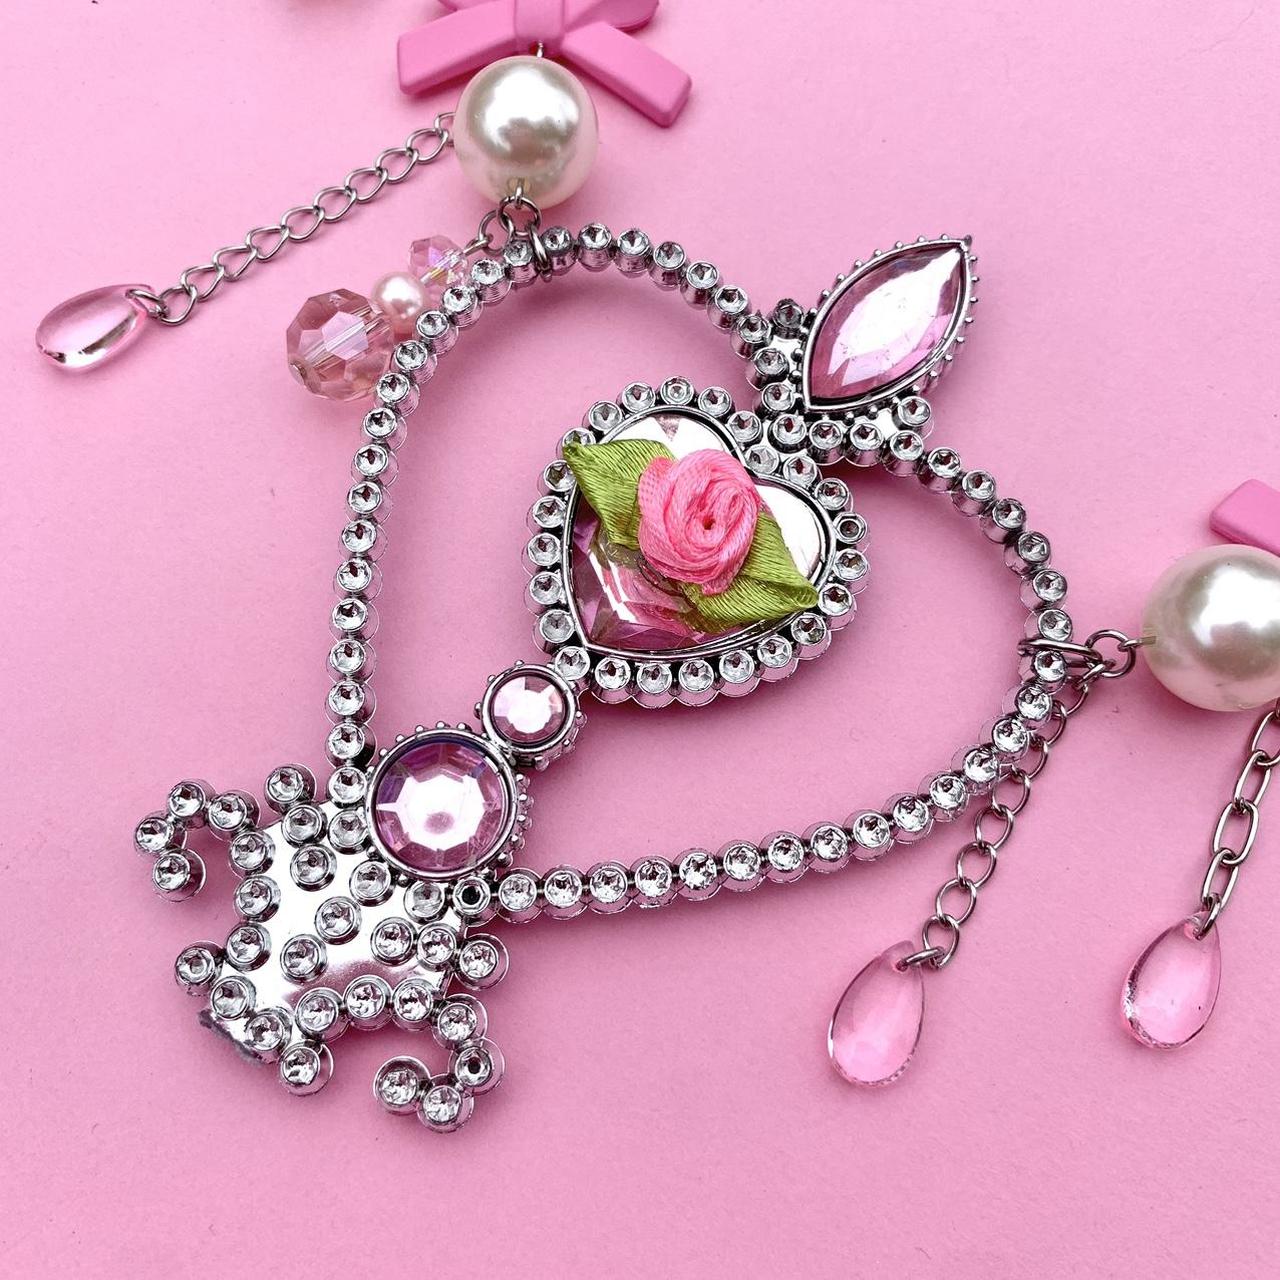 Sugarpill Women's Pink and Silver Jewellery (6)